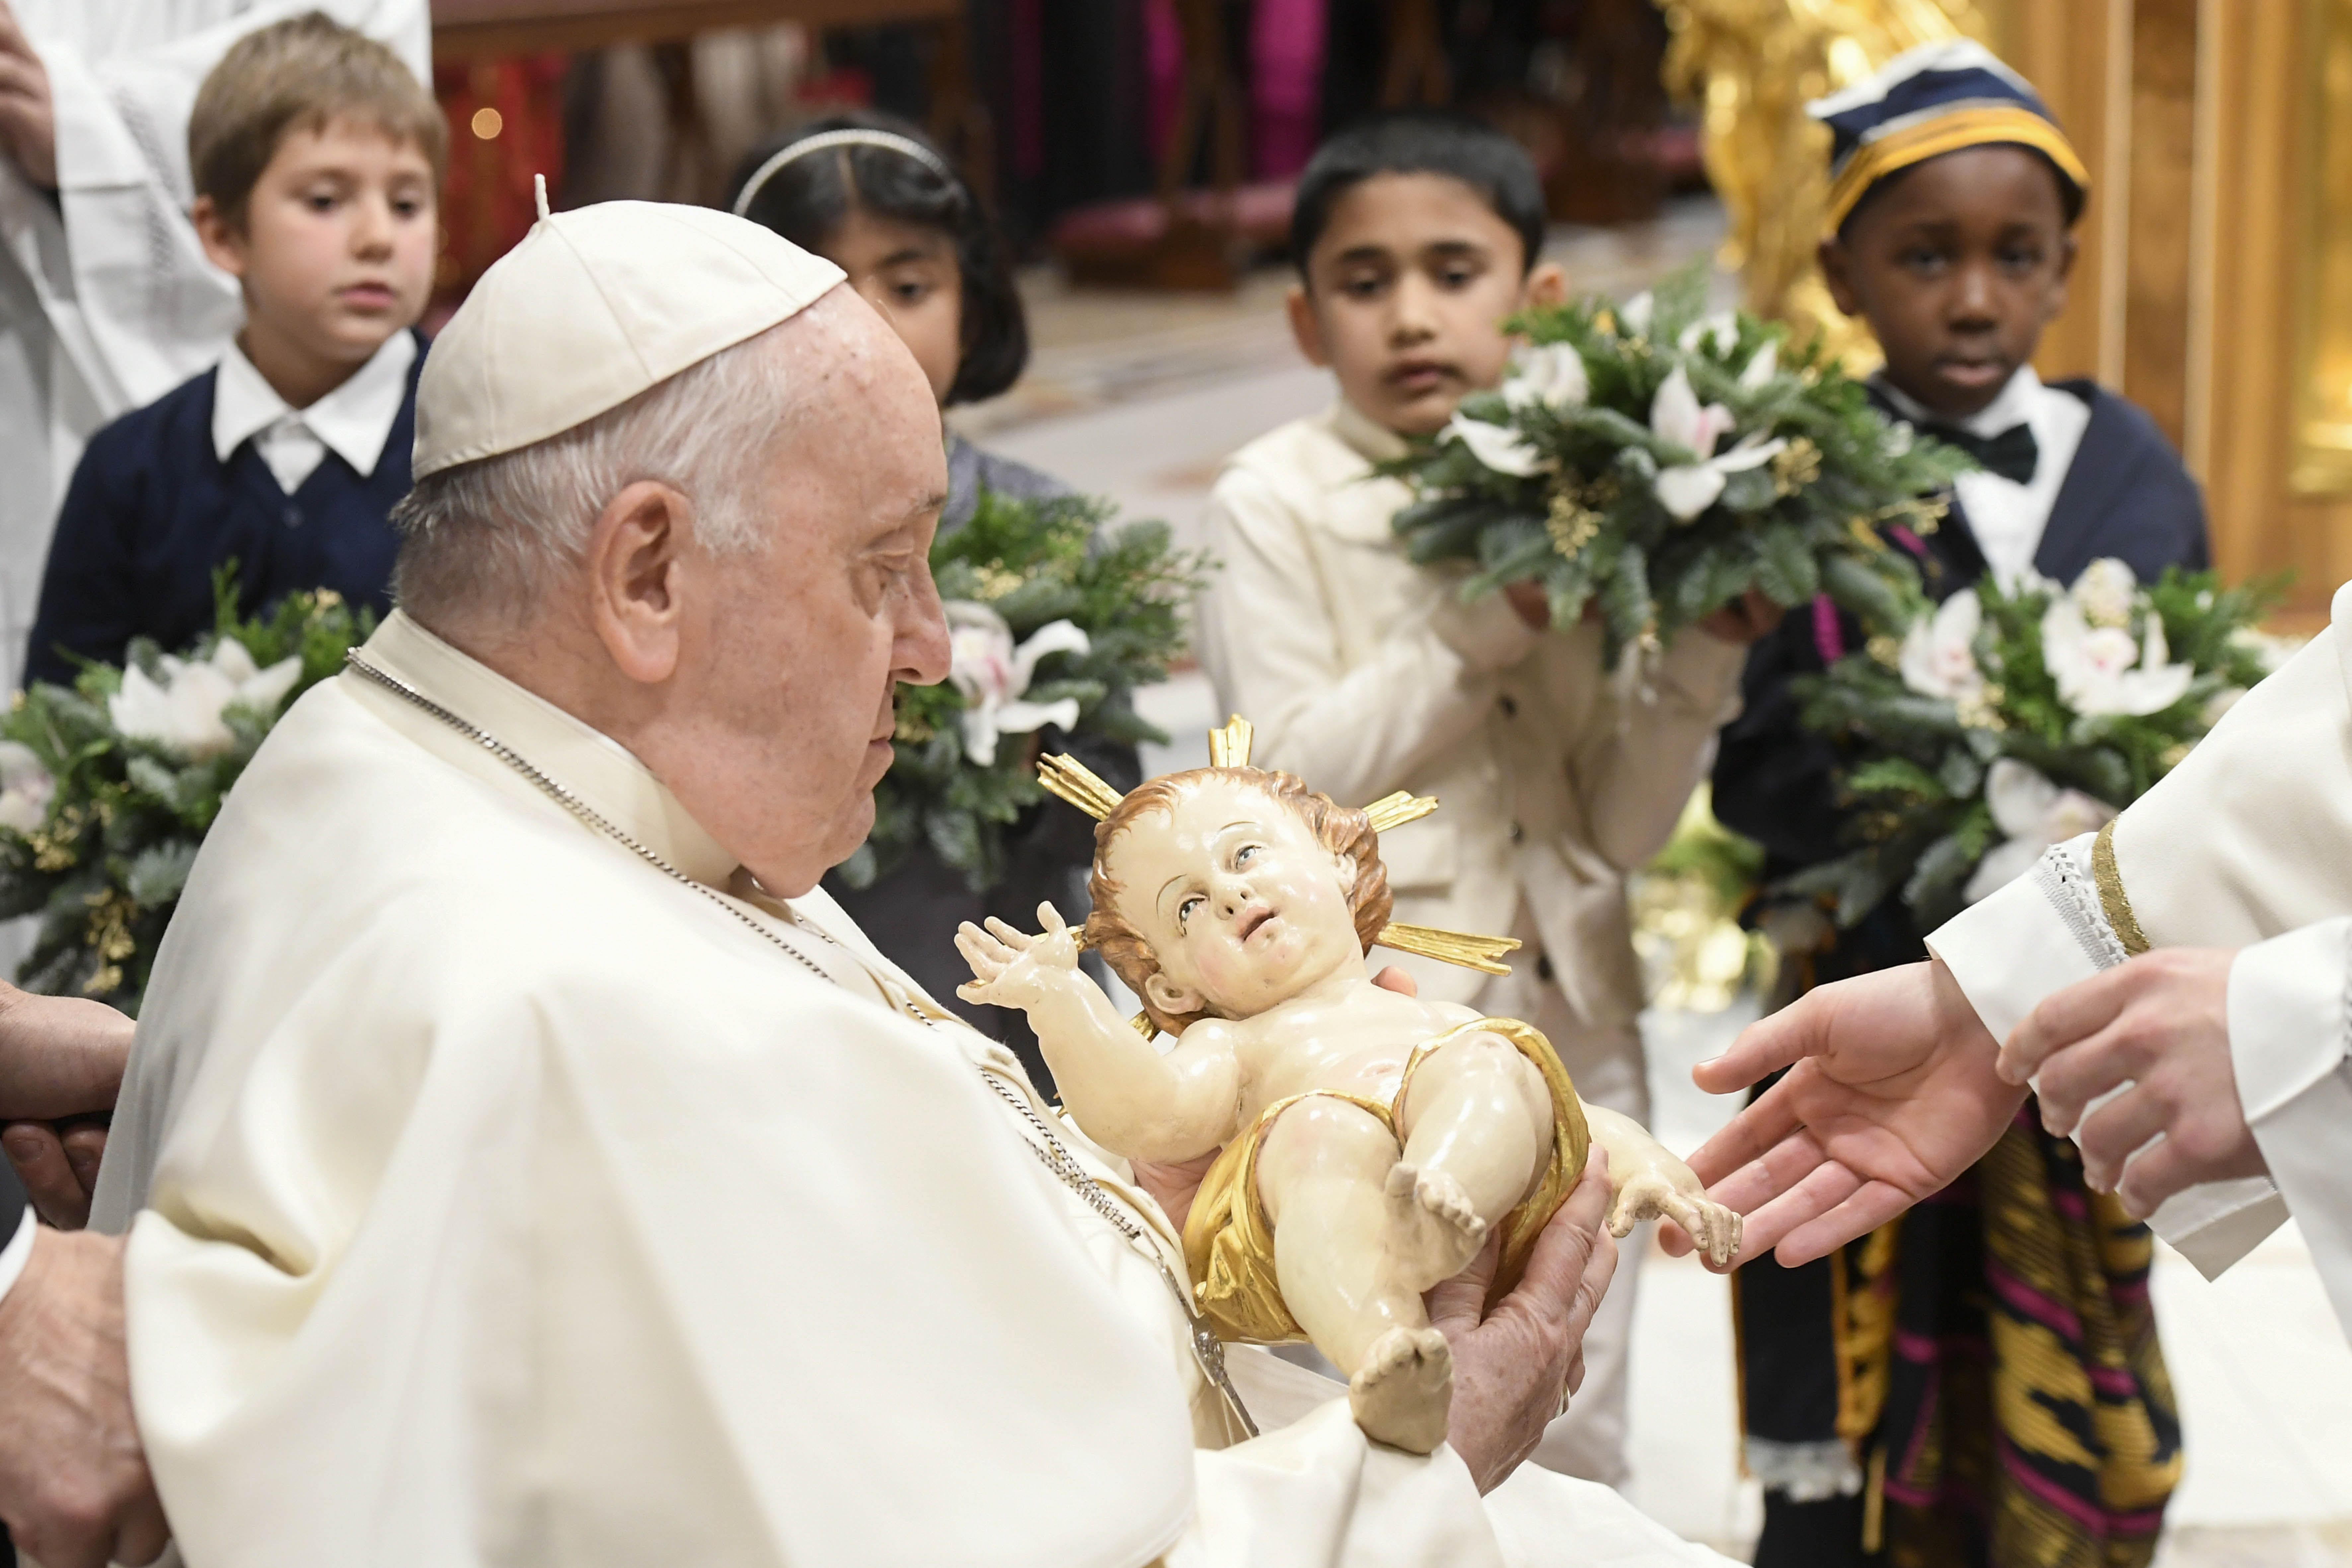 Pope Francis’ Christmas Mass: Jesus was born to save the world